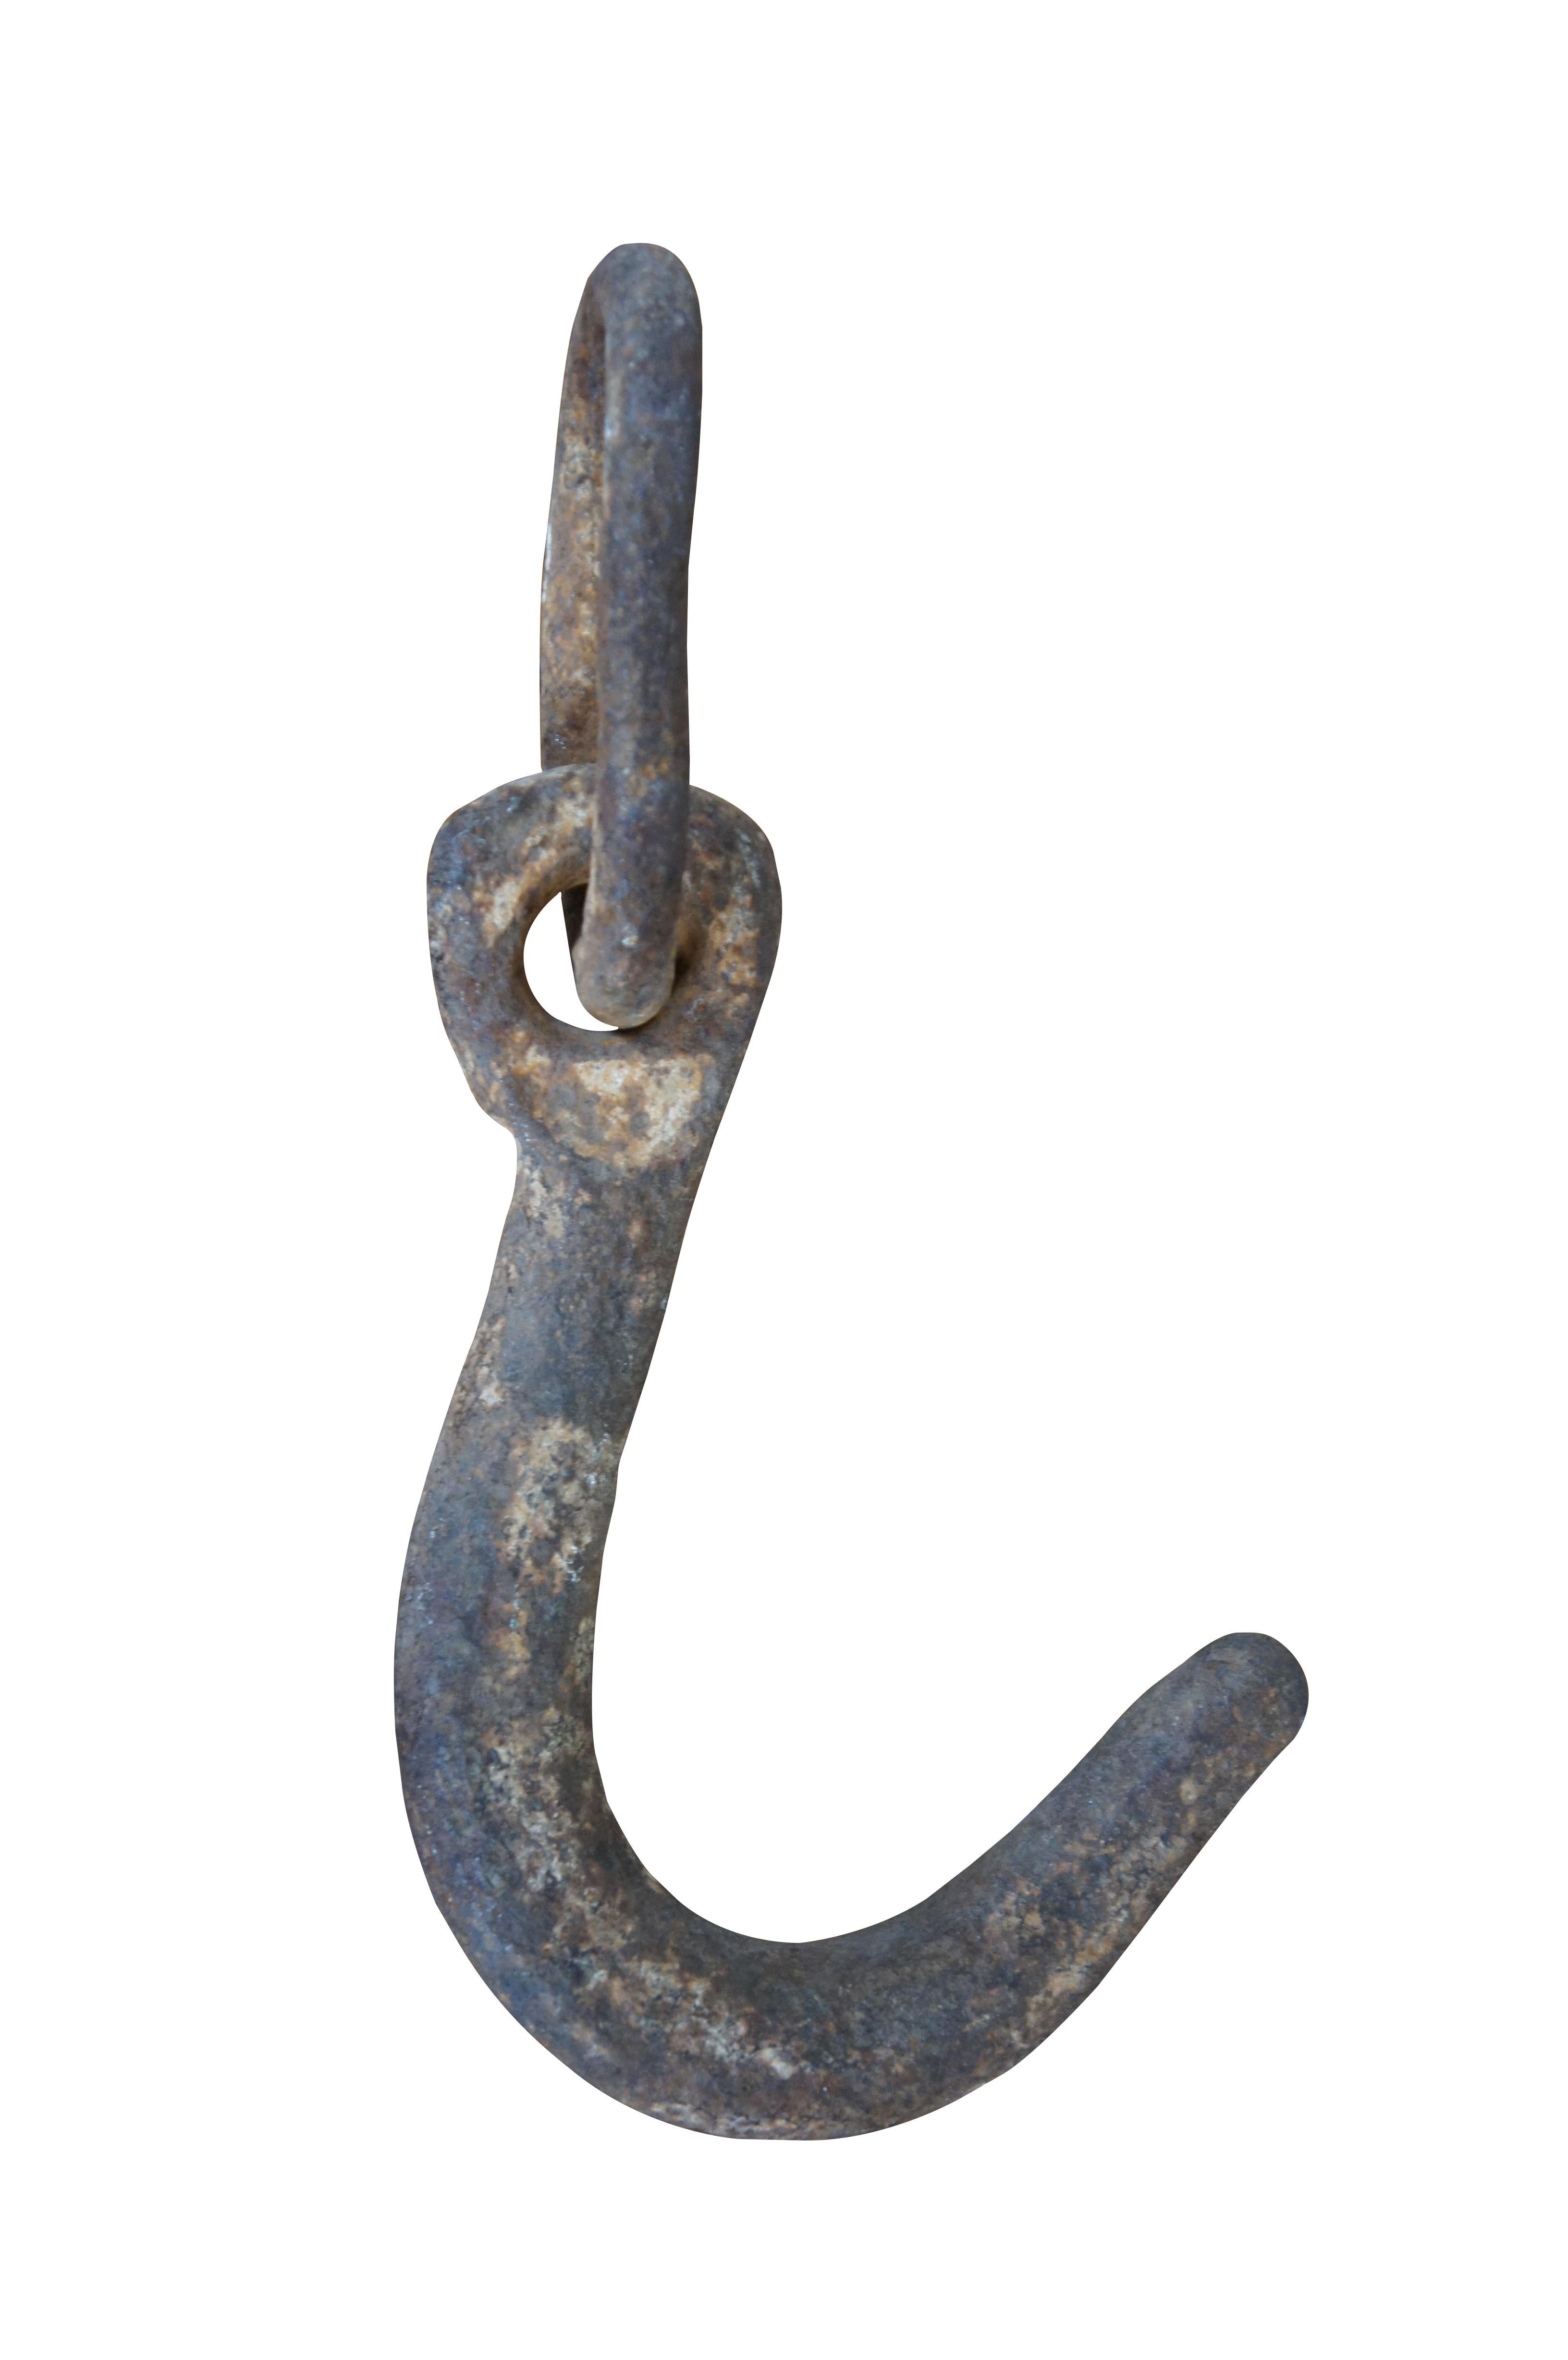 Antique cast iron hook and loop. Standard industrial design.

Dimensions:
4.5